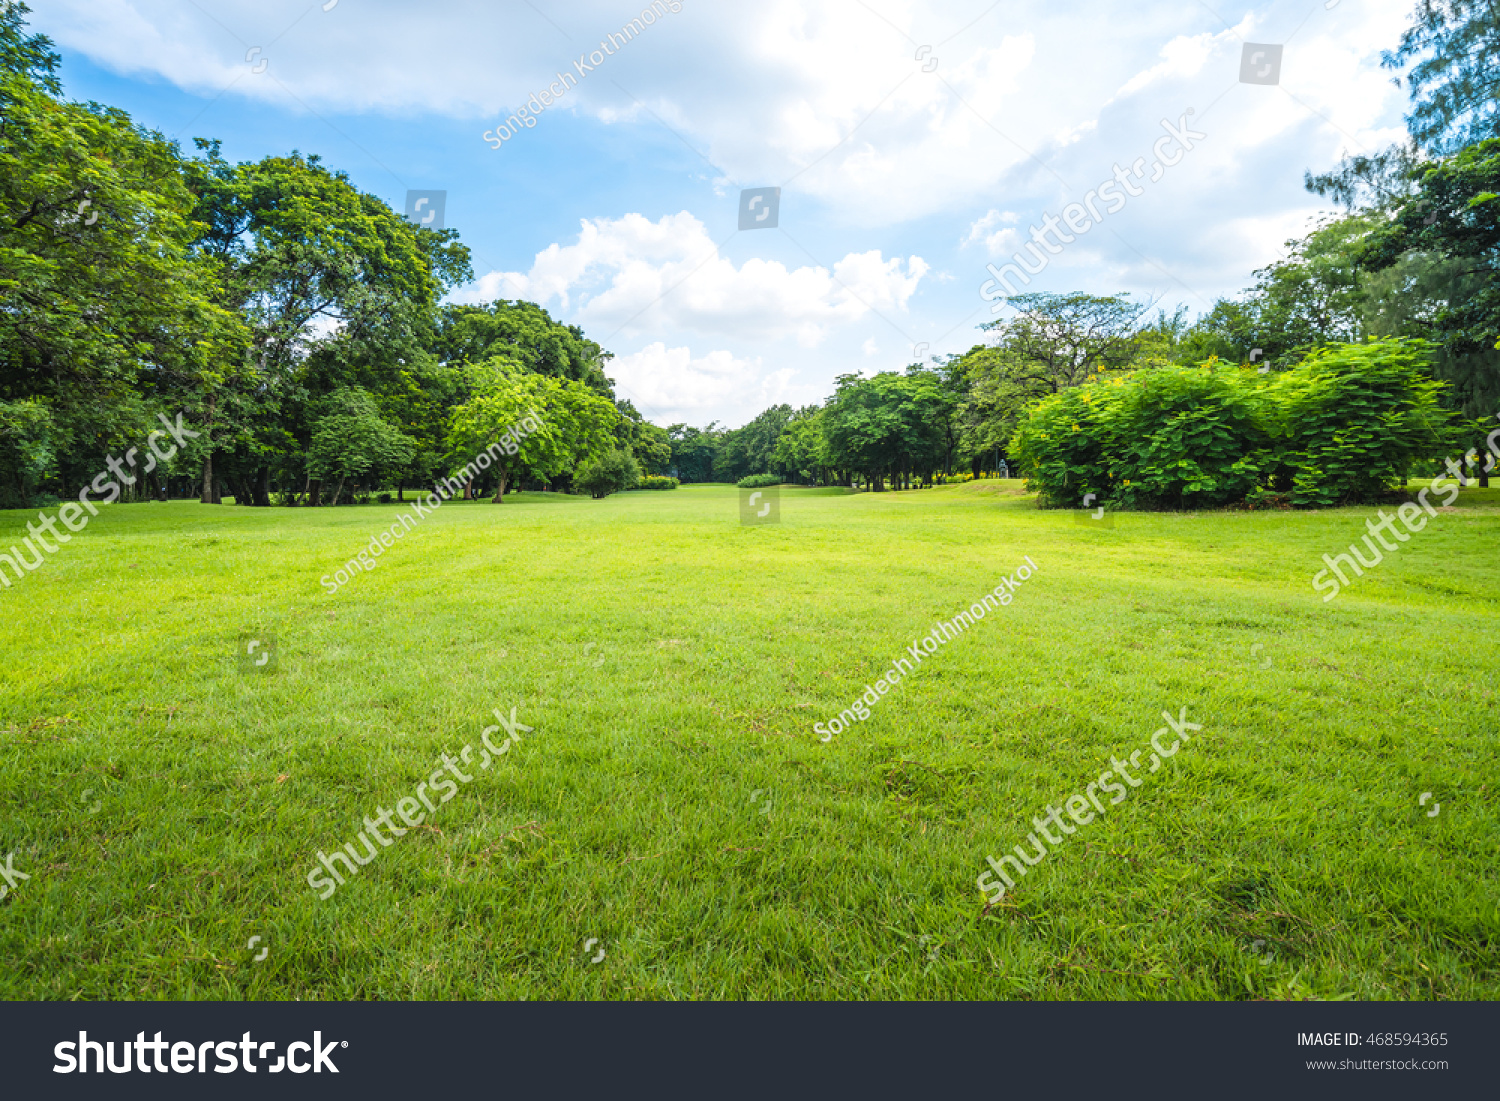 Beautiful park scene in public park with green grass field, green tree plant and a party cloudy blue sky #468594365